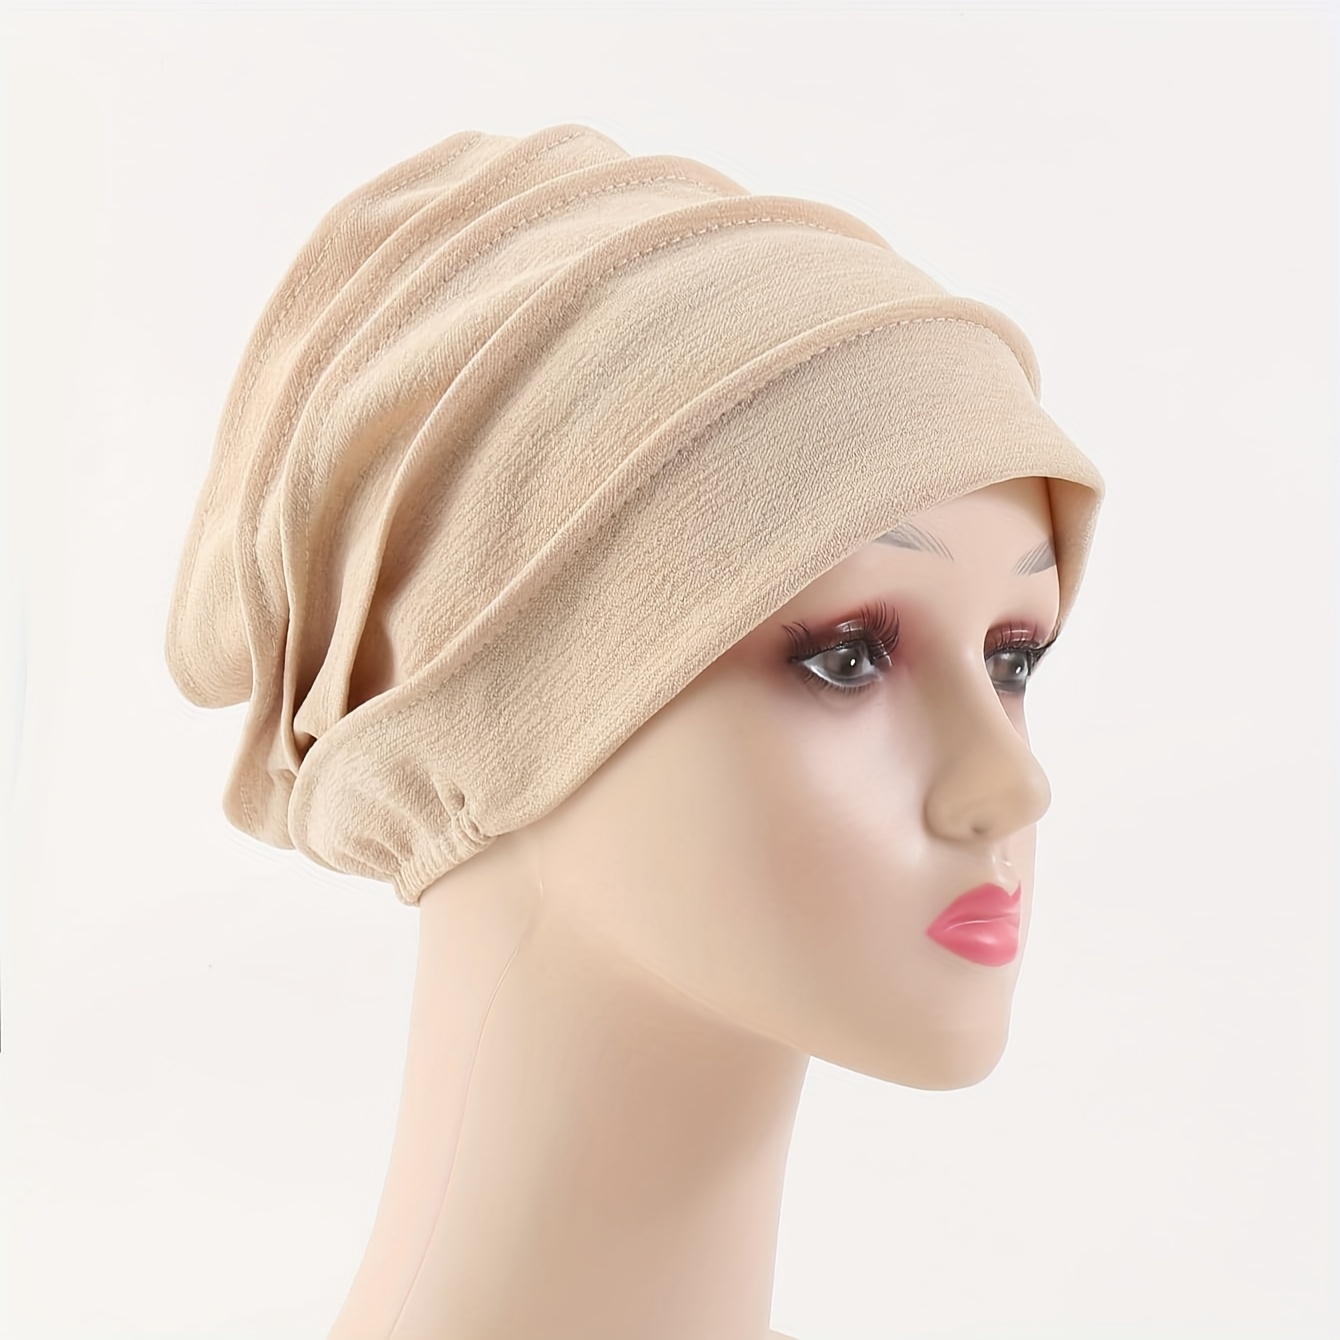 

Solid Color Pleated Turban Hat Simple Causal Head Wraps Lightweight Elastic Skull Cap Beanies Chemo Cap For Women